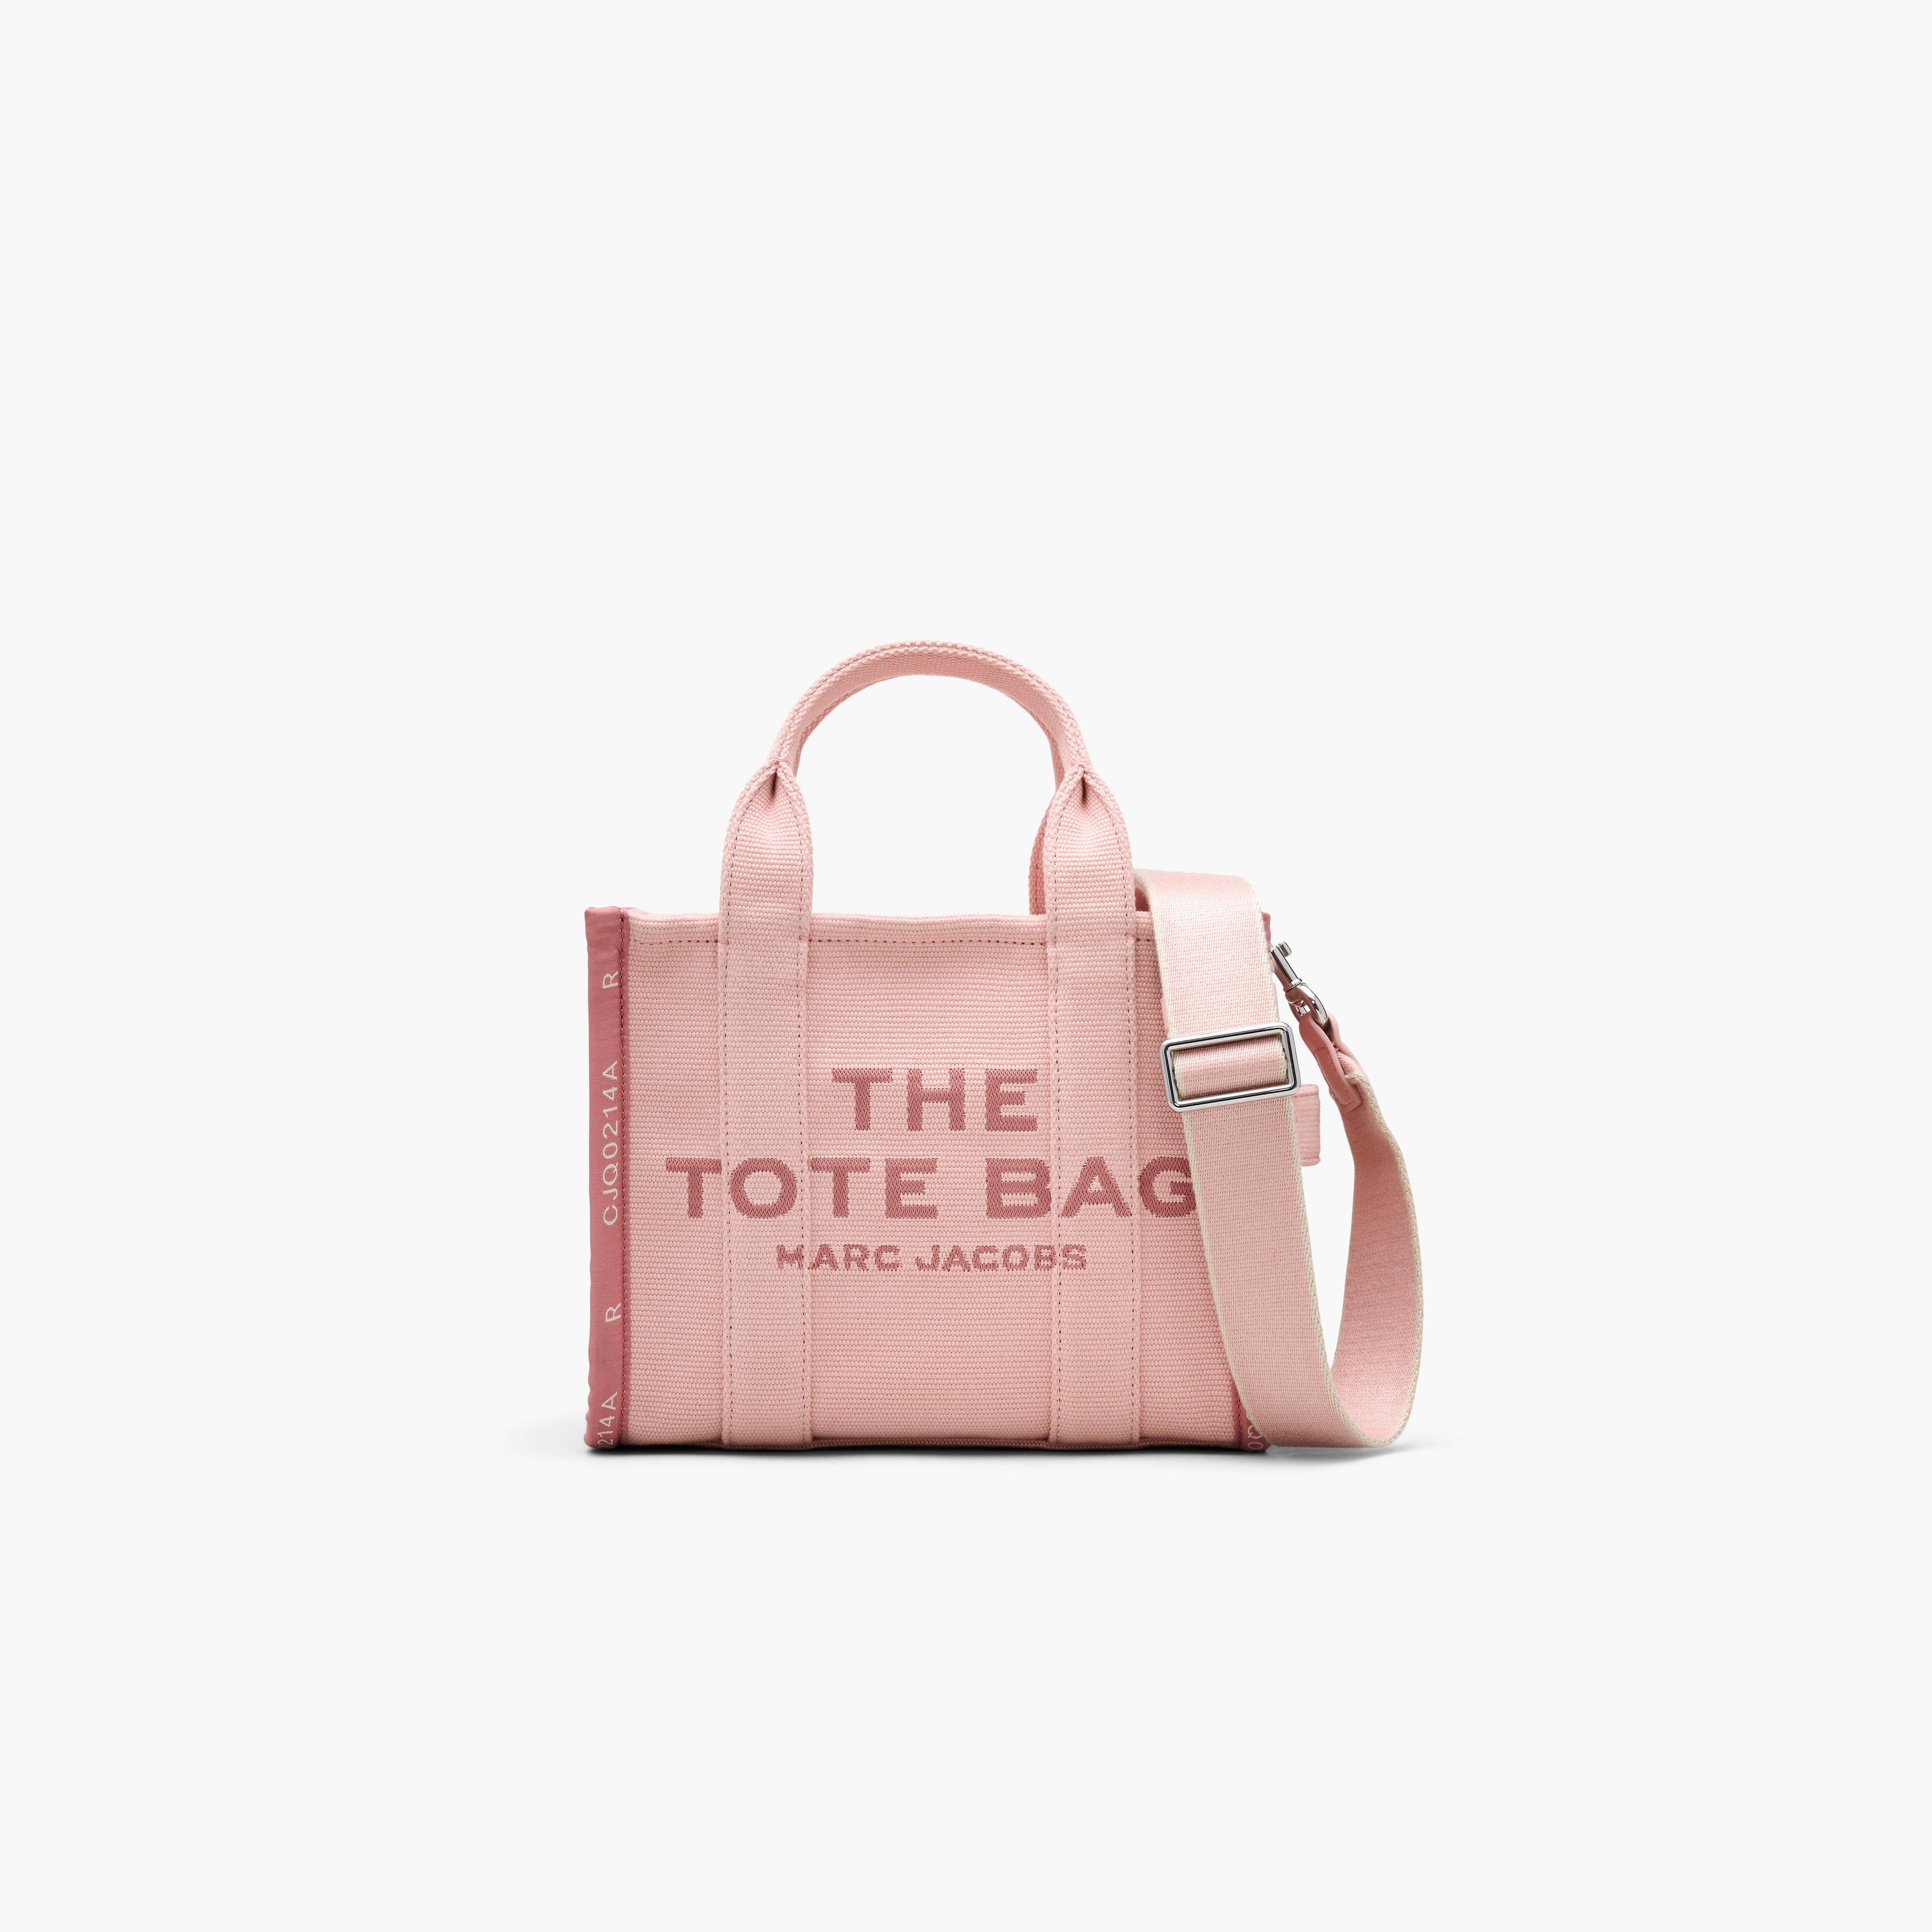 MARC JACOBS - The Summer Small Tote Bag - M0017025-624 - Rose Borse Marc Jacobs 